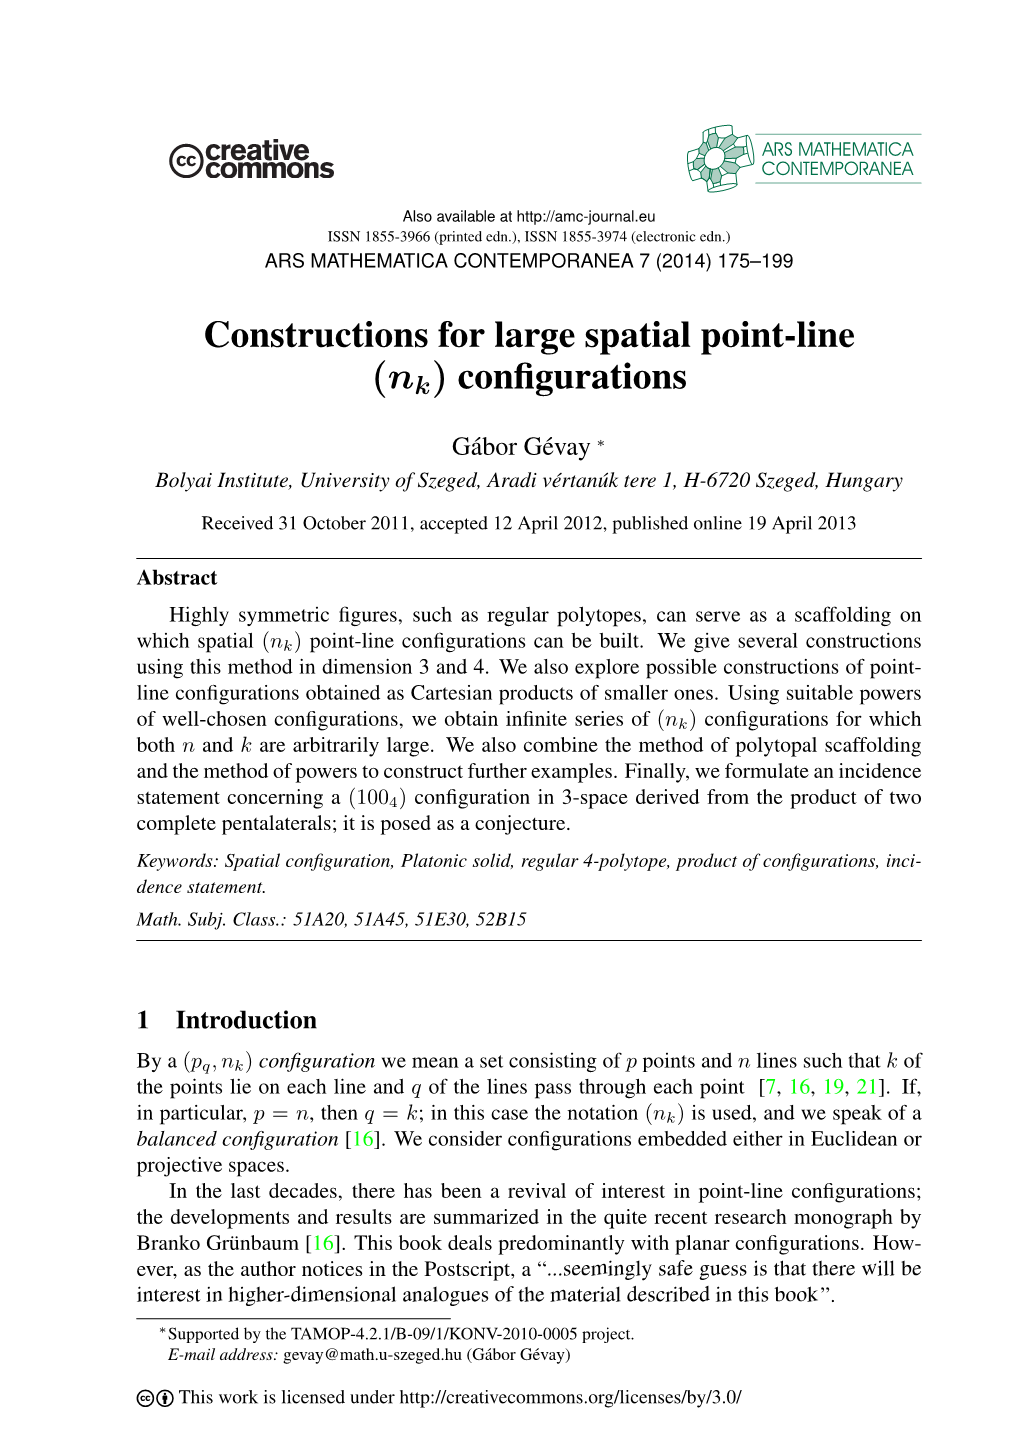 Constructions for Large Spatial Point-Line (Nk) Configurations